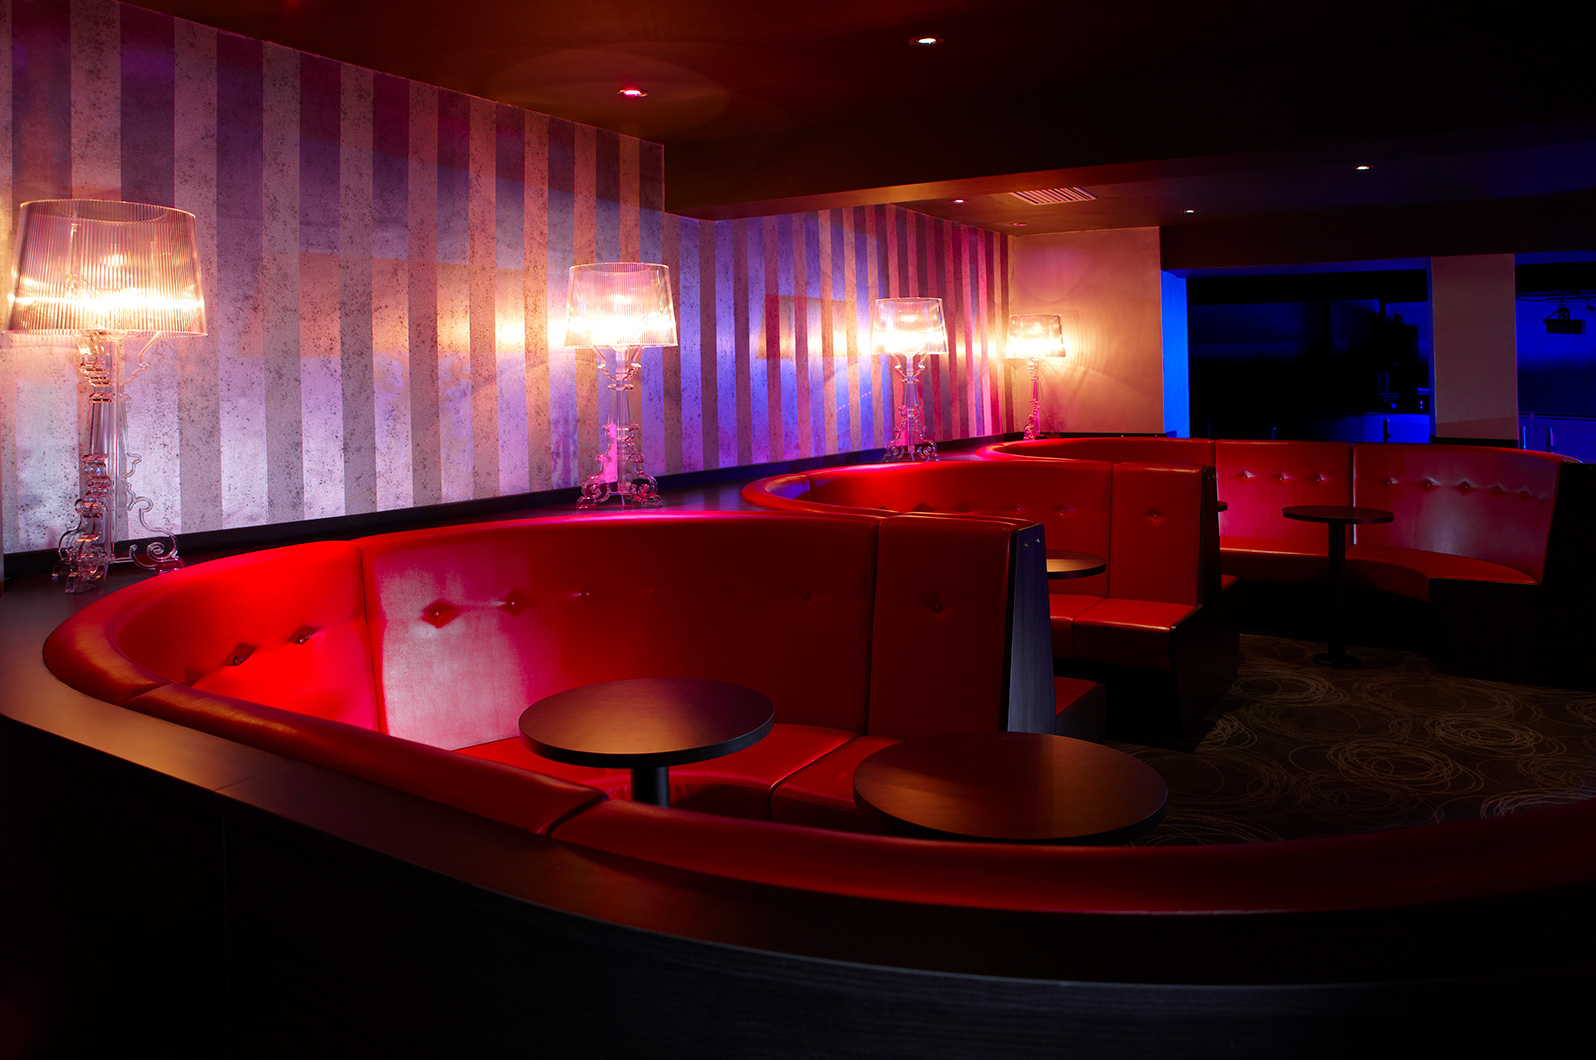 Image shot to convey the shapes and colours used in the interior design of Coast nightclub.